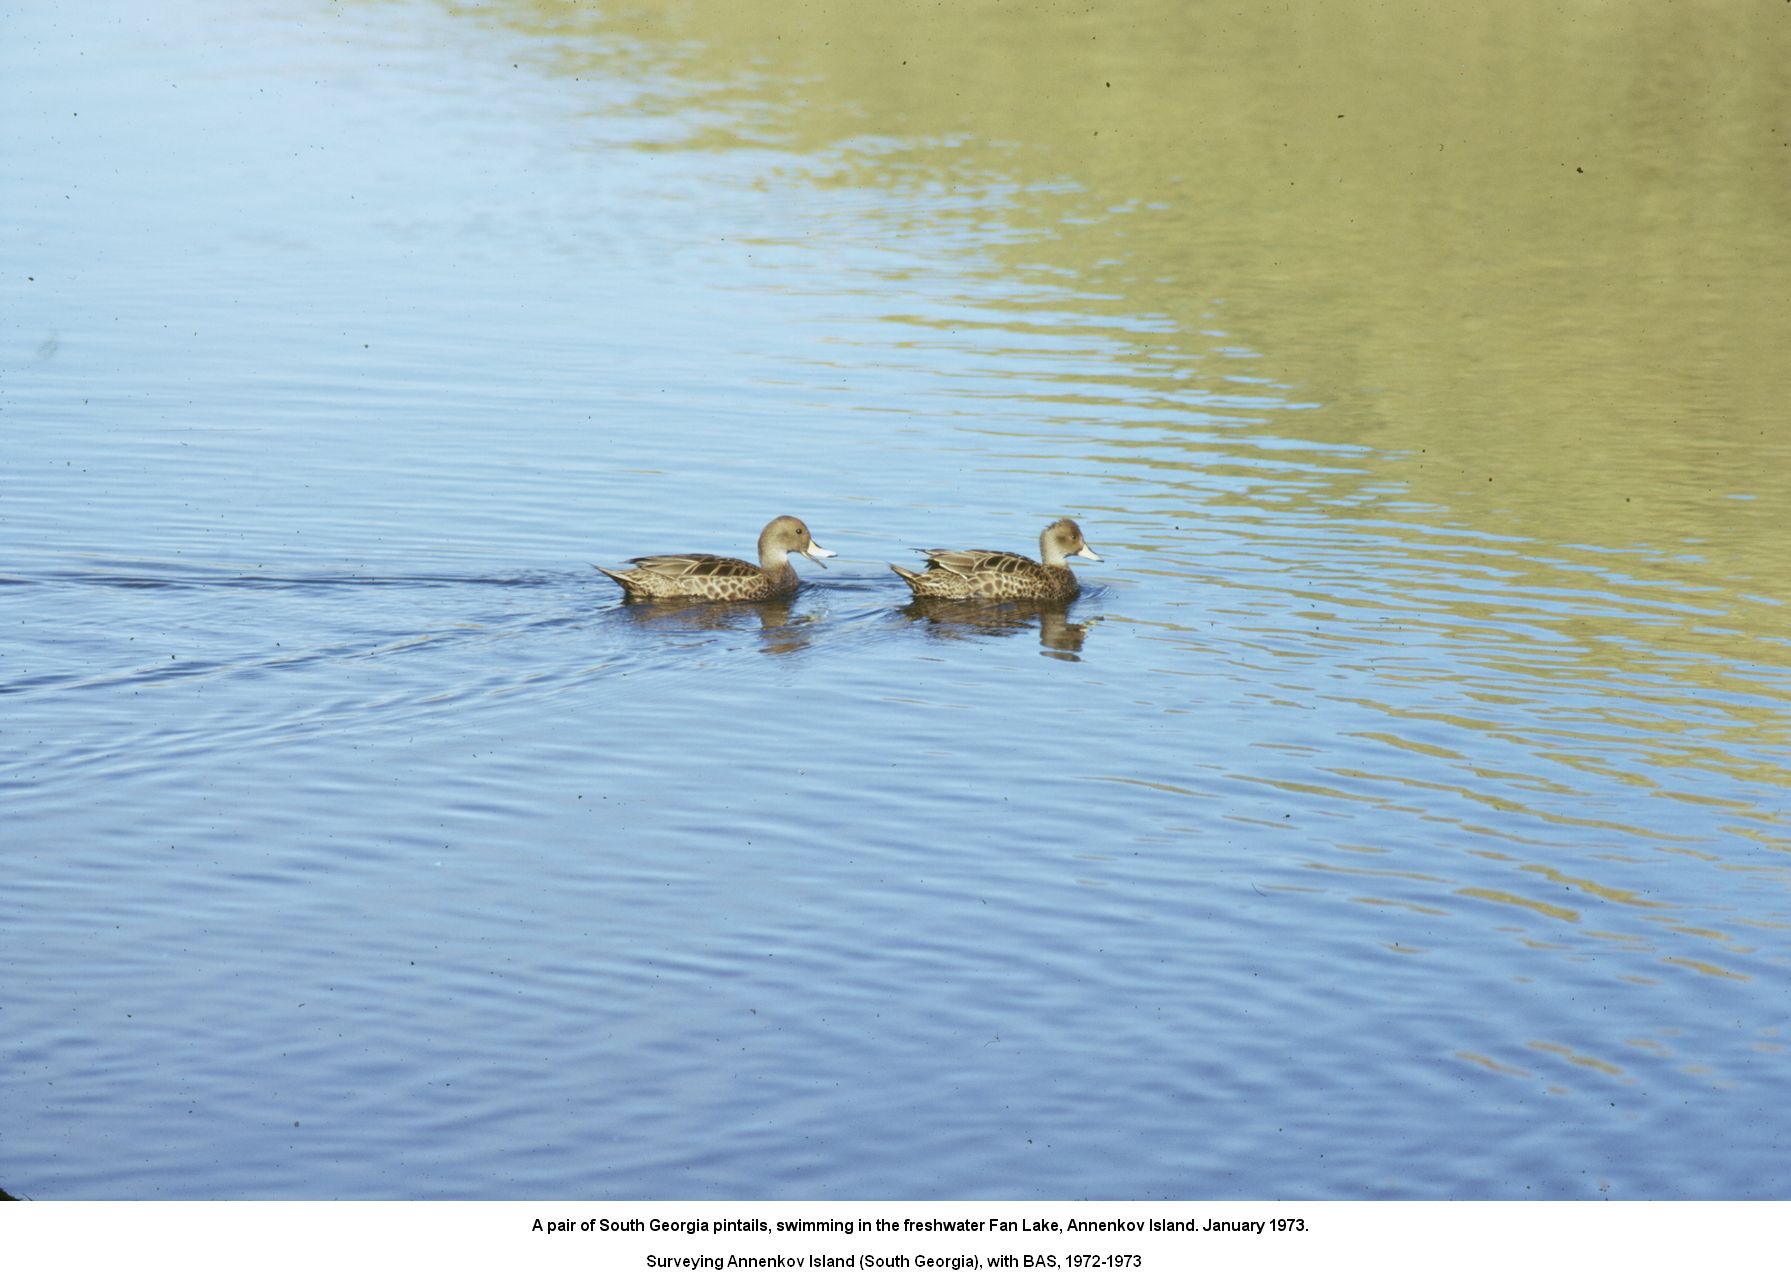 A pair of South Georgia pintails, swimming in the freshwater Fan Lake, Annenkov Island. January 1973.